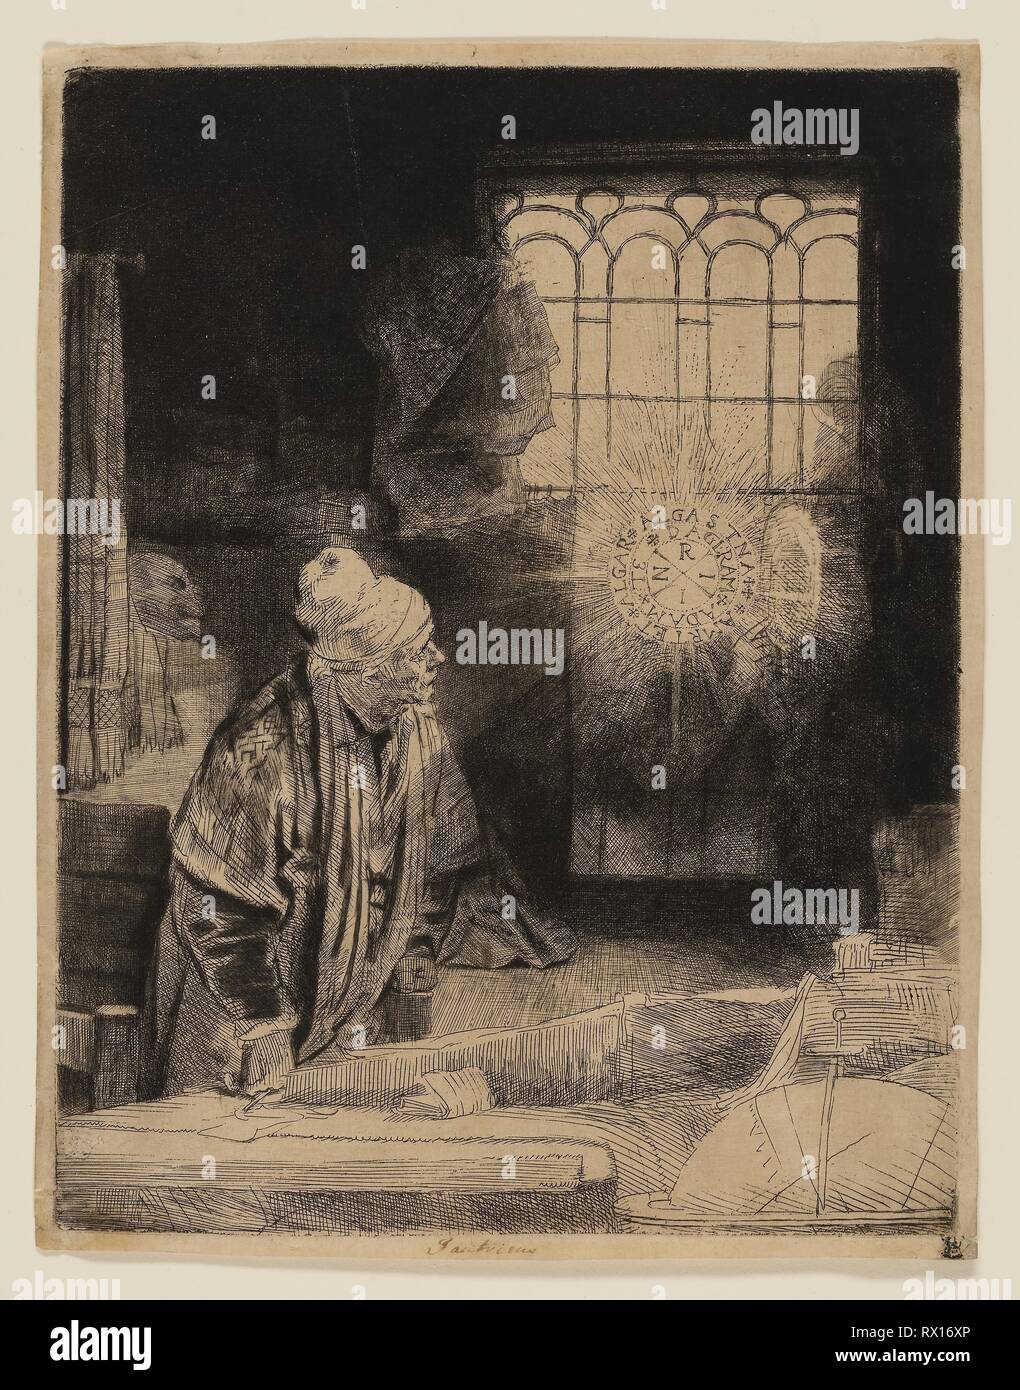 A Scholar in His Study (Faust). Rembrandt van Rijn; Dutch, 1606-1669. Date: 1647-1657. Dimensions: 209 x 161 mm (plate); 217 x 168 mm (sheet). Etching, drypoint, and engraving, on ivory Japanese paper. Origin: Holland. Museum: The Chicago Art Institute. Author: REMBRANDT HARMENSZOON VAN RIJN. Rembrandt van Rhijn. Stock Photo